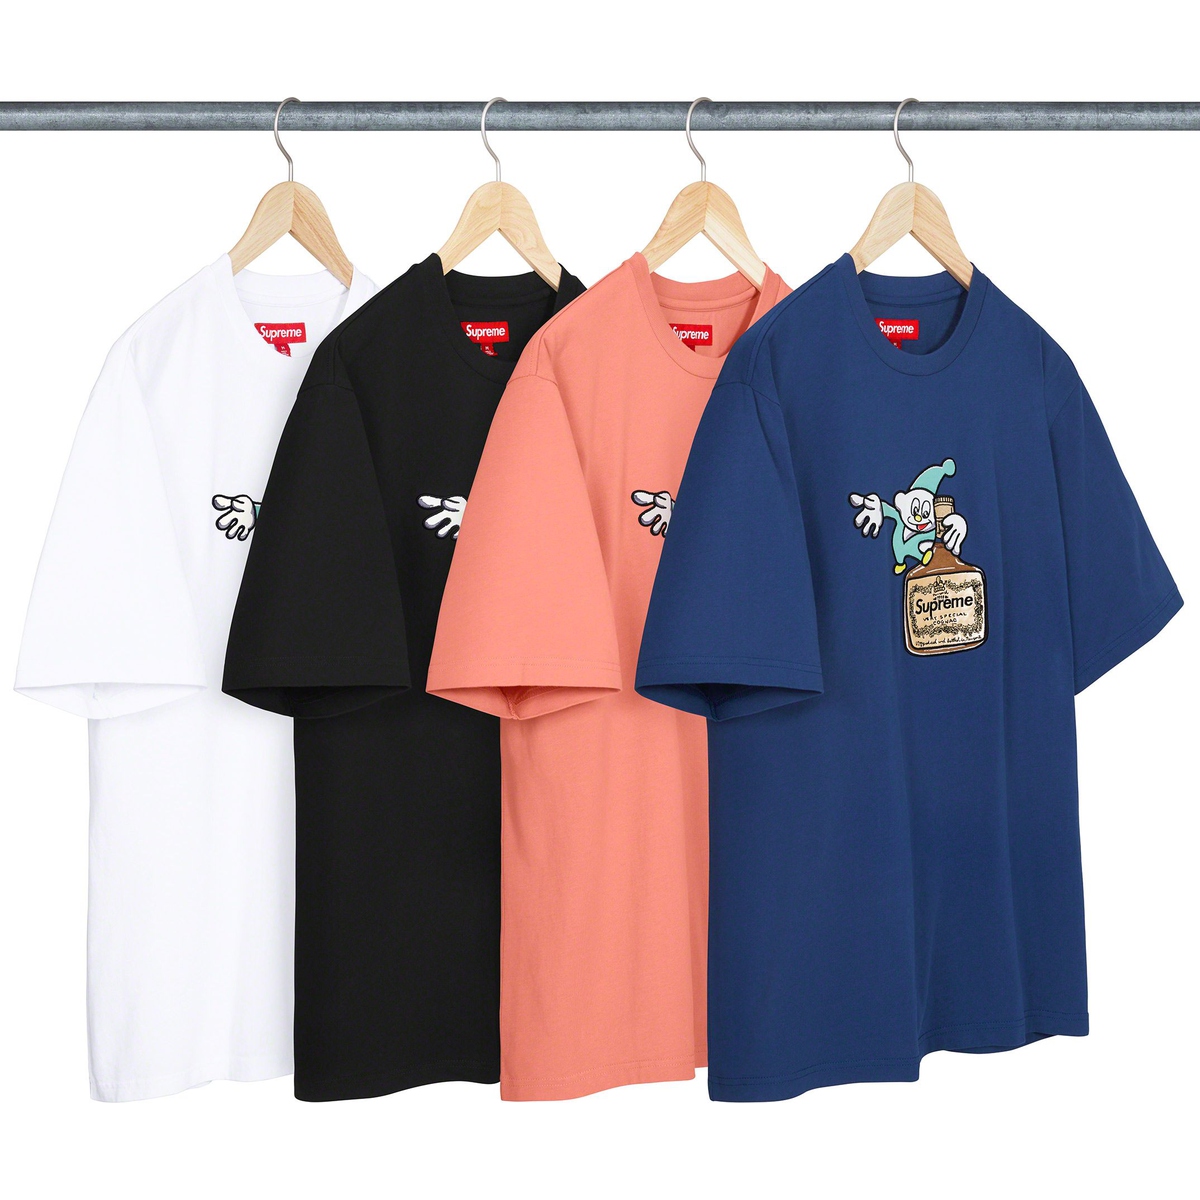 Supreme Elf S S Top released during fall winter 23 season